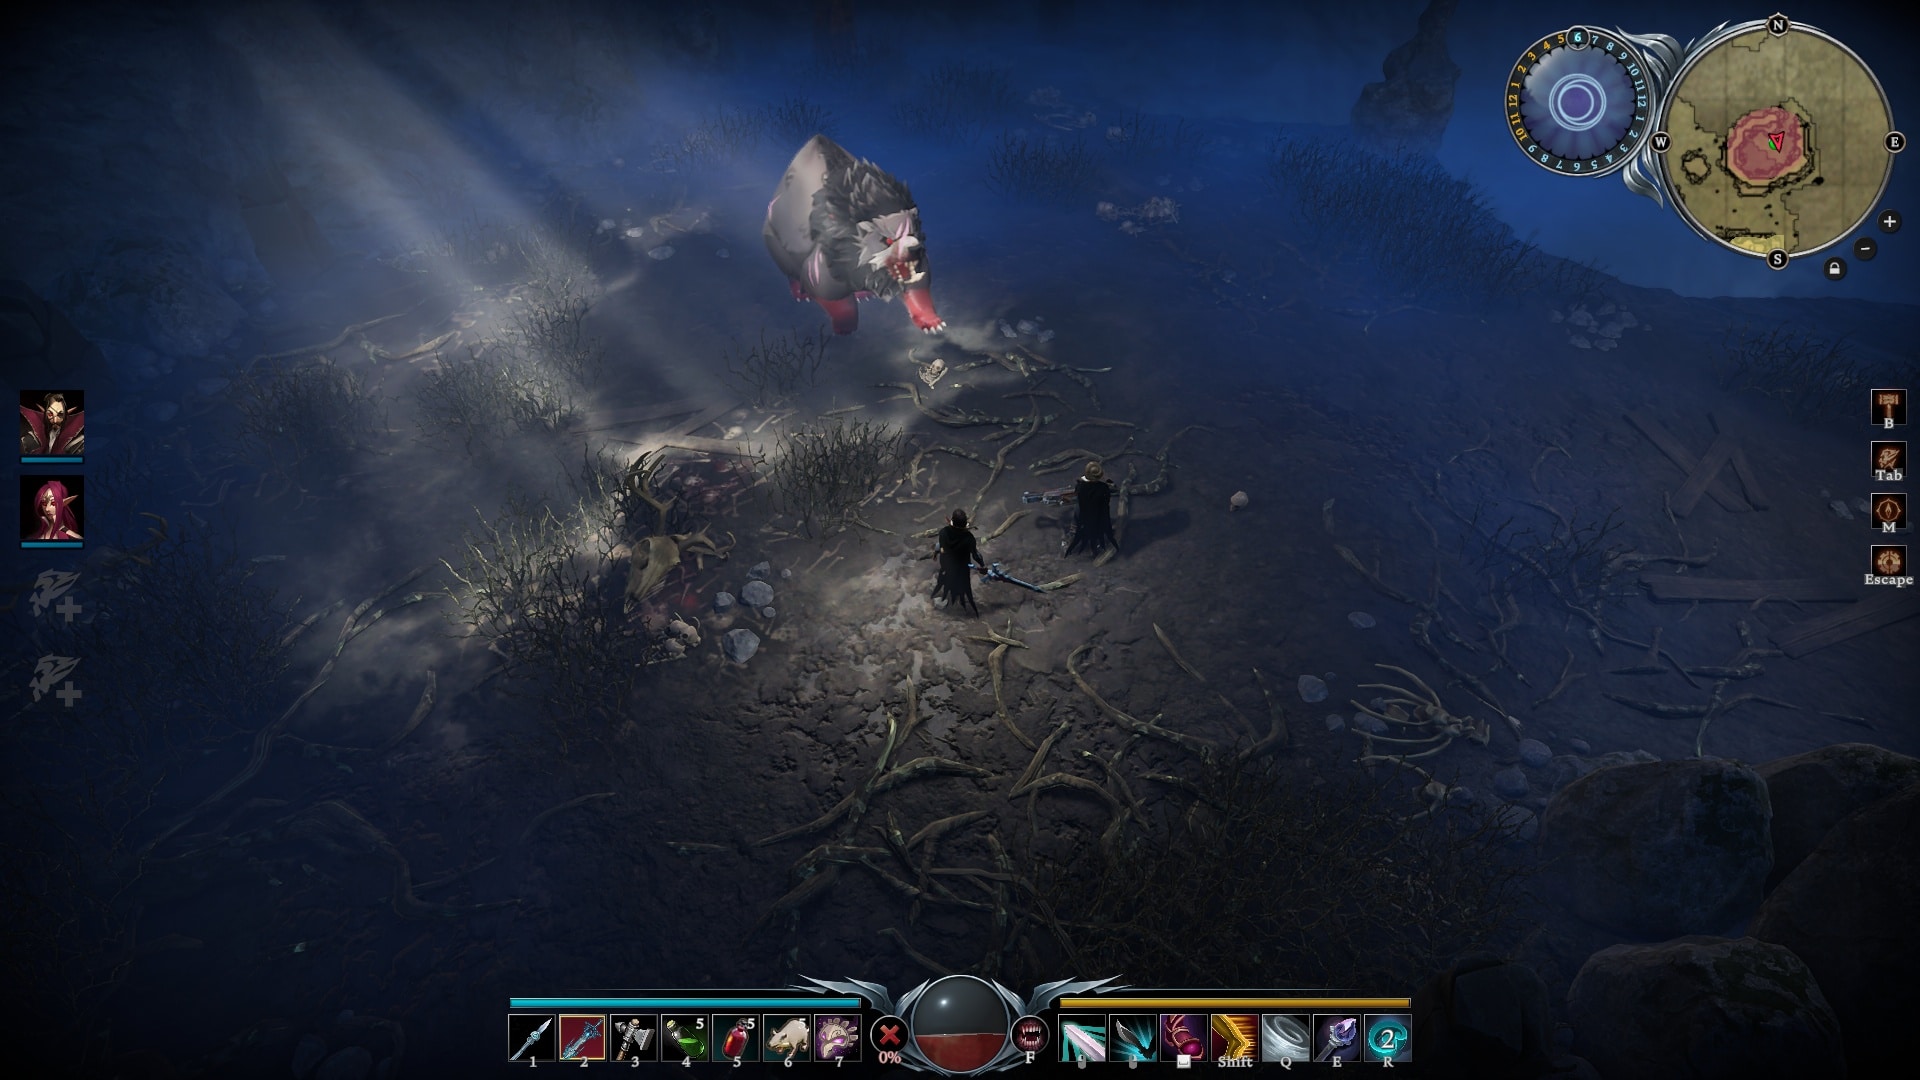 Bosses and mini-bosses are everywhere in the open world. Their blood can give your vampires new abilities.